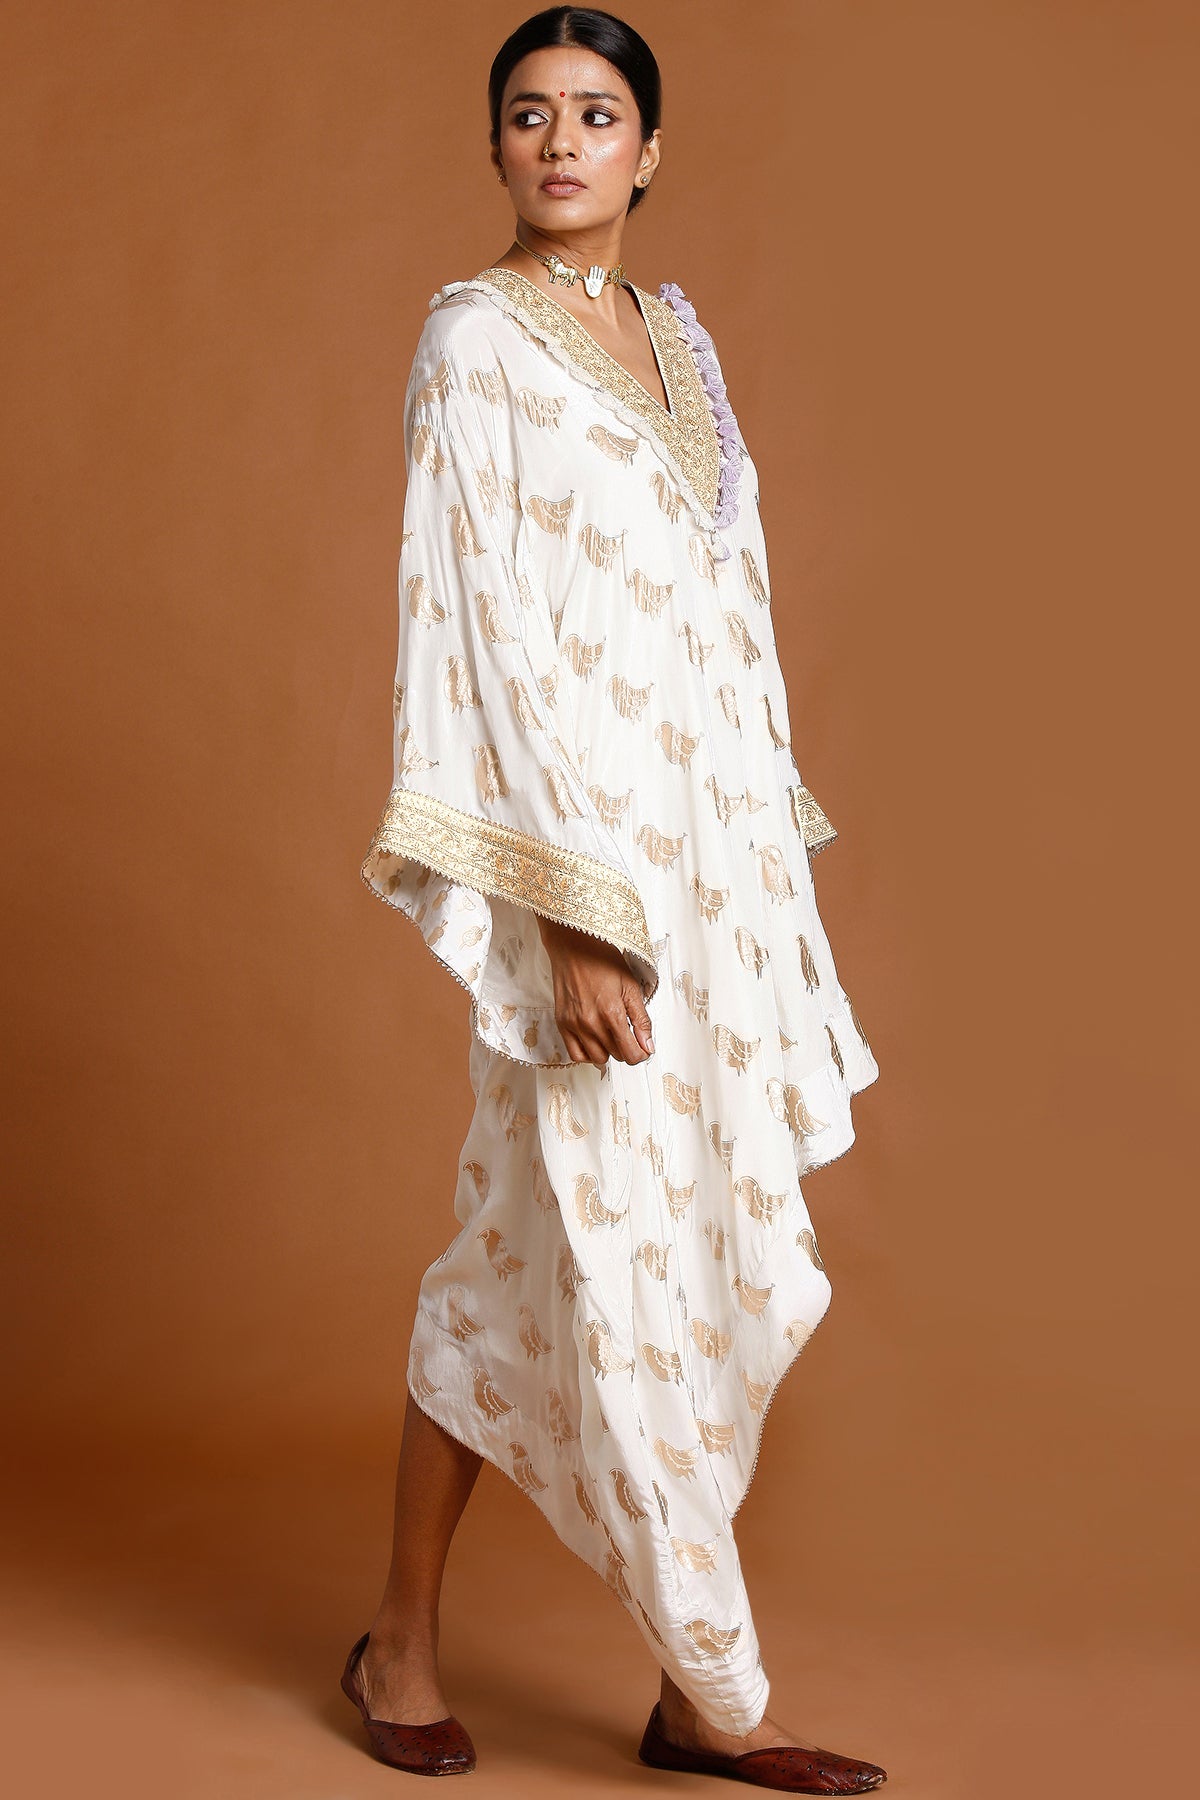 Ivory Crepe Kaftan - Indian Clothing in Denver, CO, Aurora, CO, Boulder, CO, Fort Collins, CO, Colorado Springs, CO, Parker, CO, Highlands Ranch, CO, Cherry Creek, CO, Centennial, CO, and Longmont, CO. Nationwide shipping USA - India Fashion X